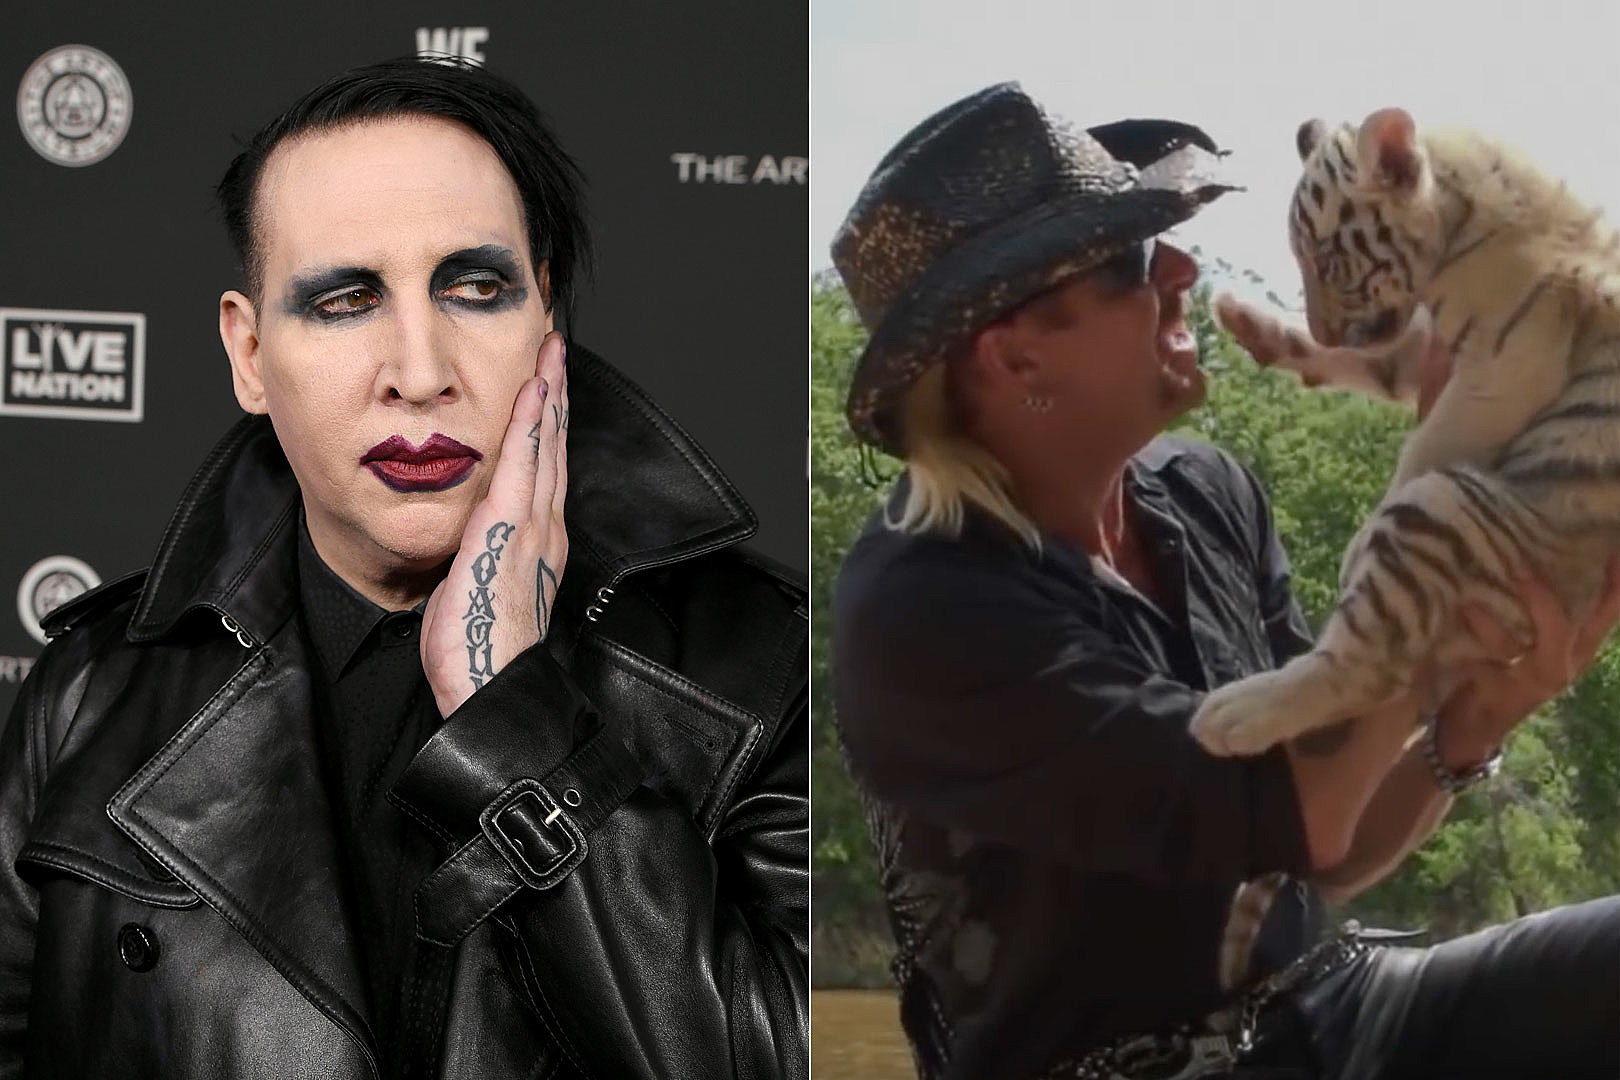 Marilyn Manson and Father Wear Matching Makeup